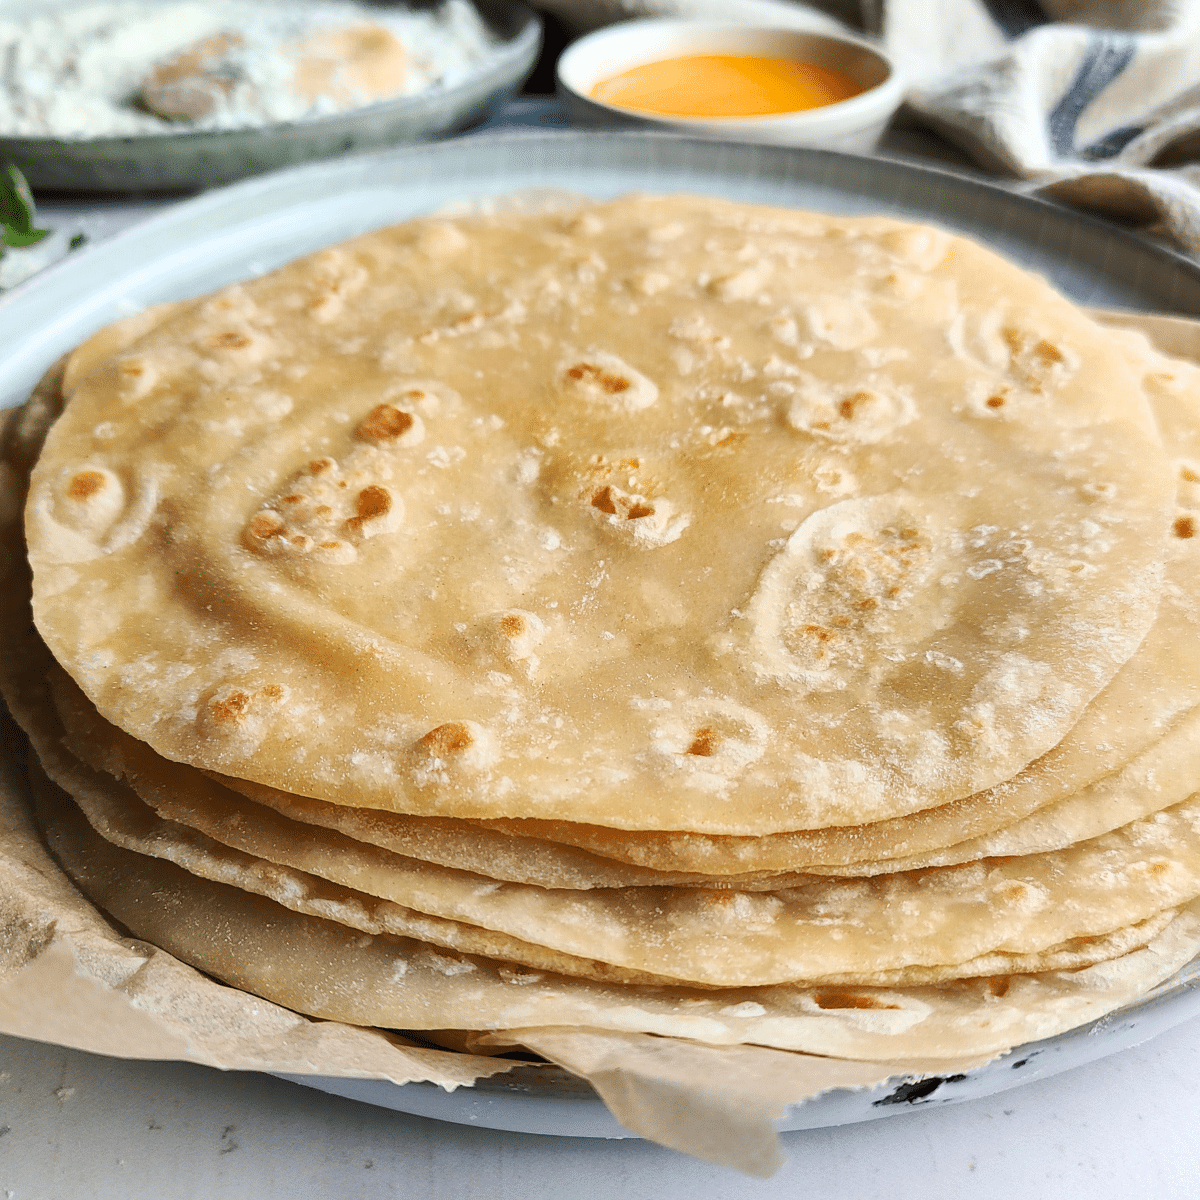 Stack the flatbreads as you cook and cover them with a paper towel or tea towel. This maintains their softness and flexibility.